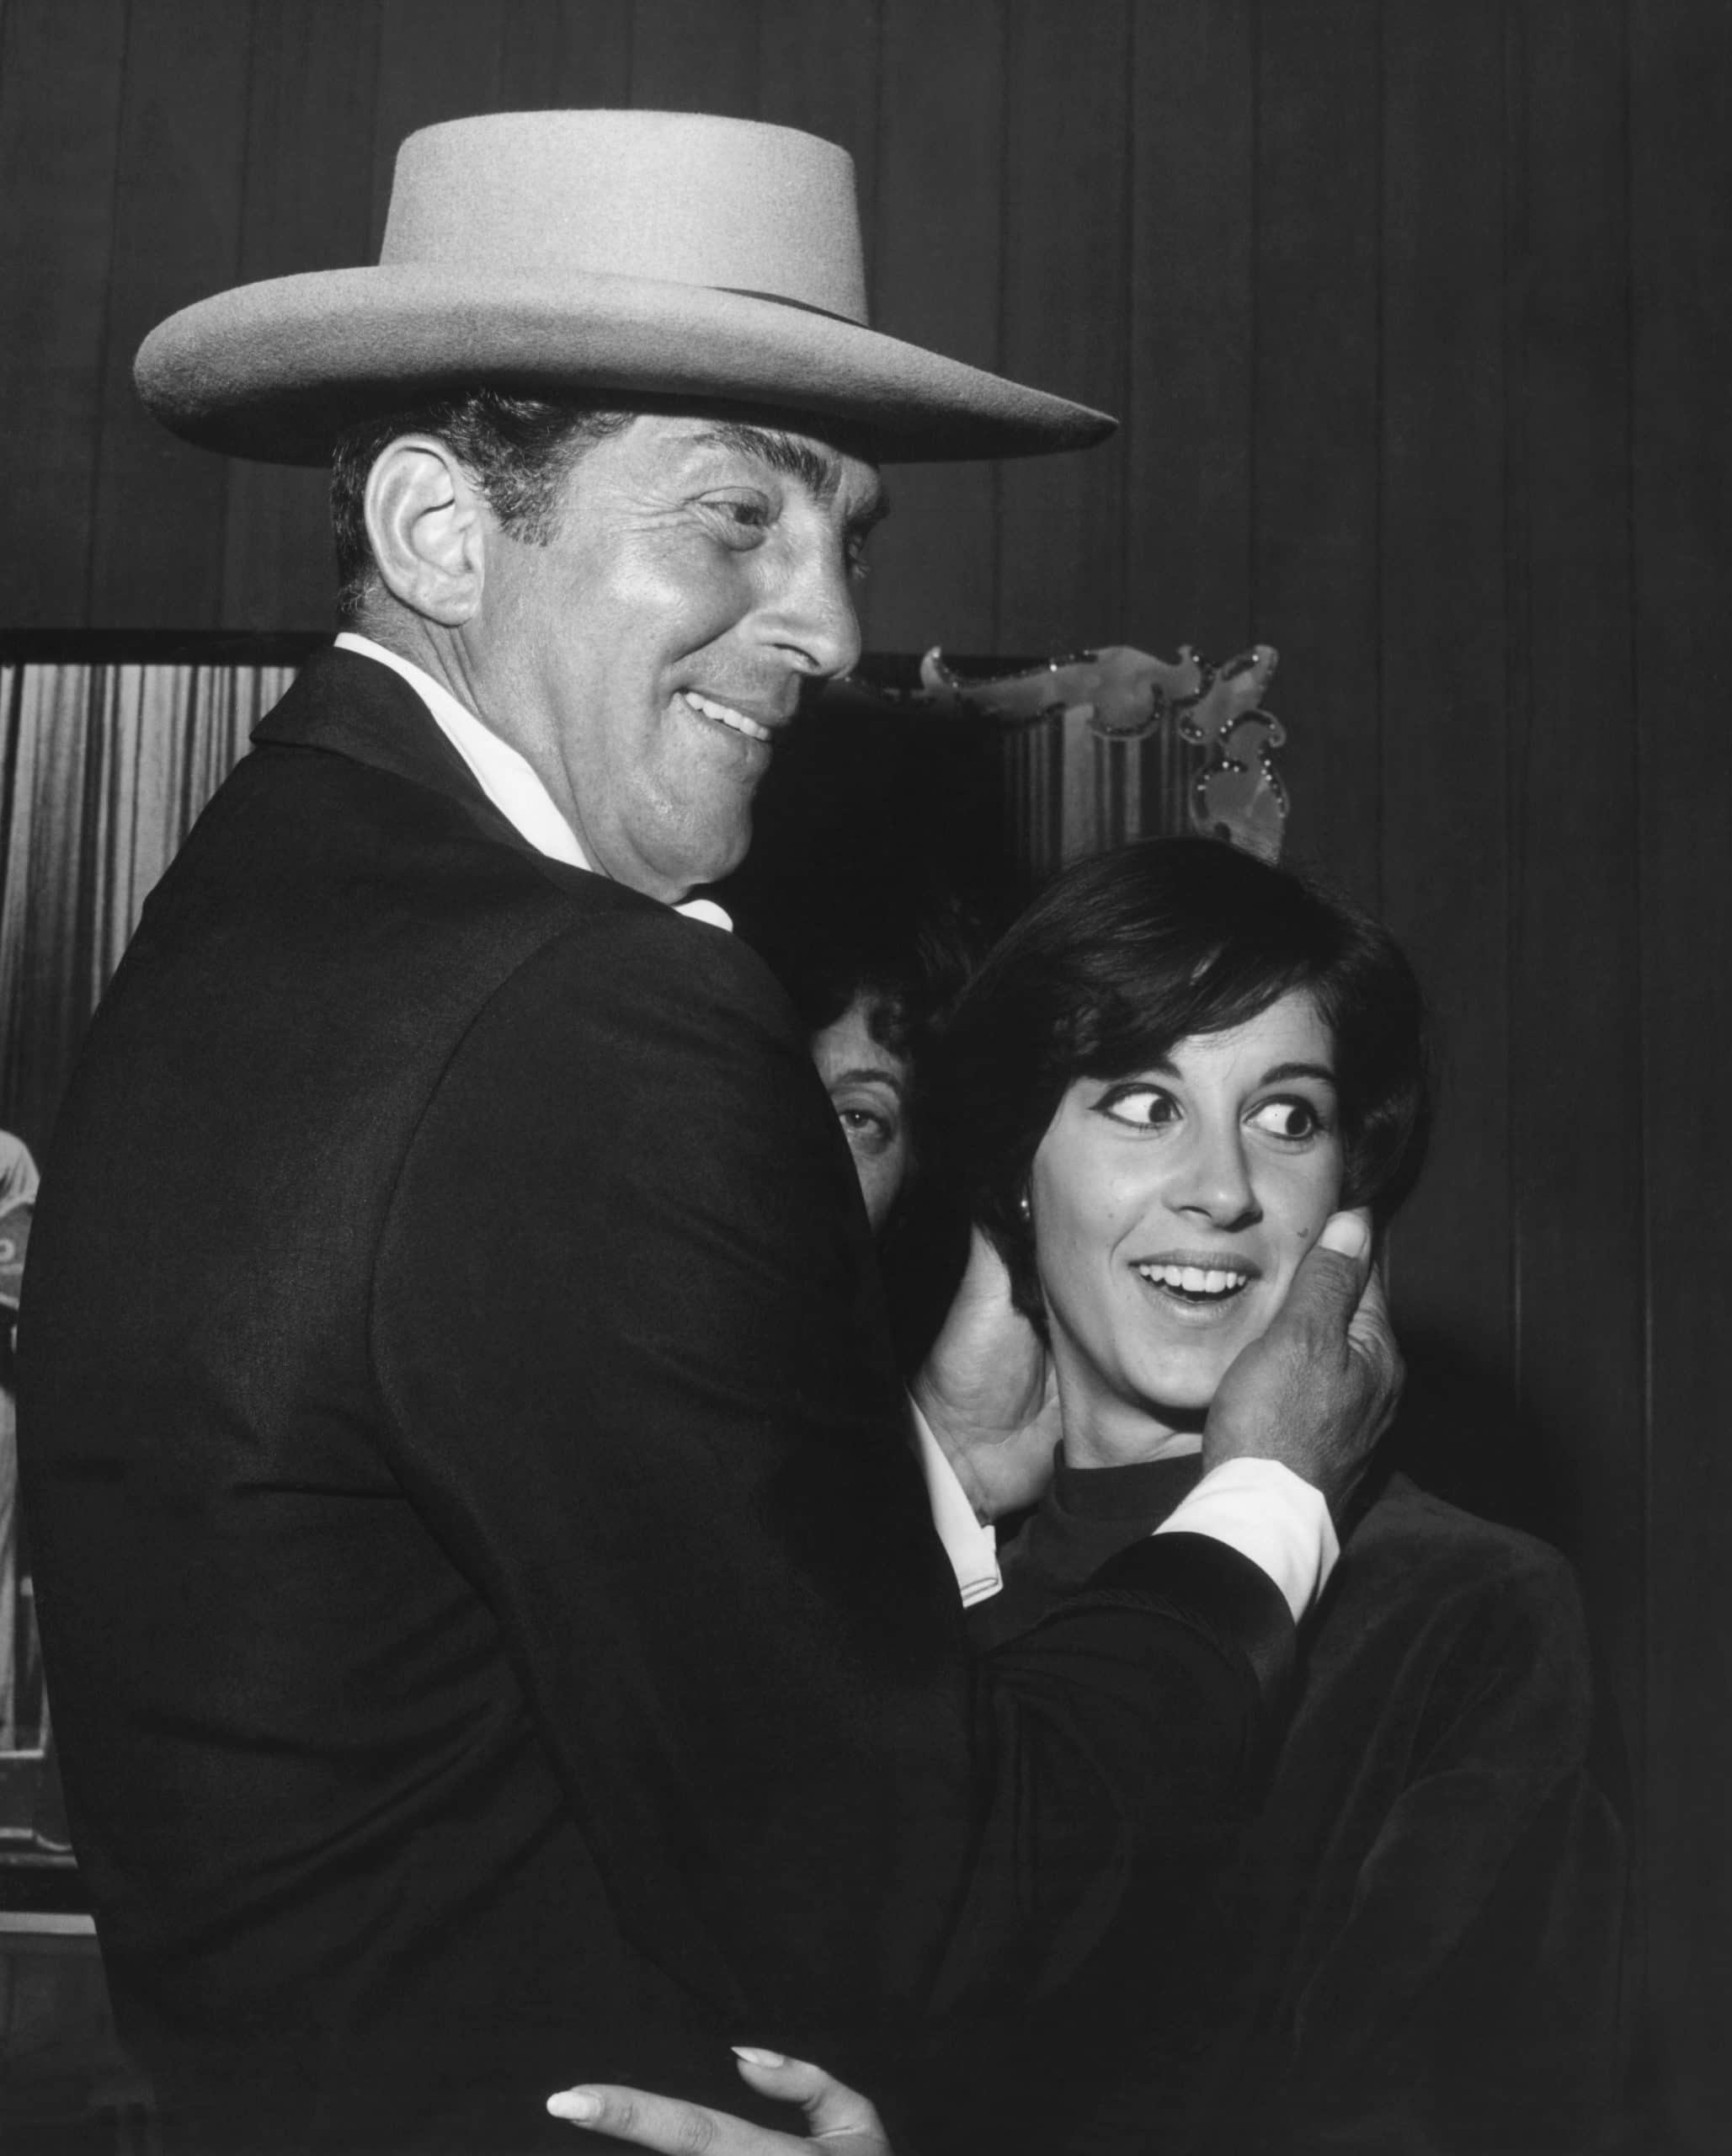 From left: Dean Martin and daughter Deana Martin backstage at the Santa Monica Civic Auditorium, late 1960s